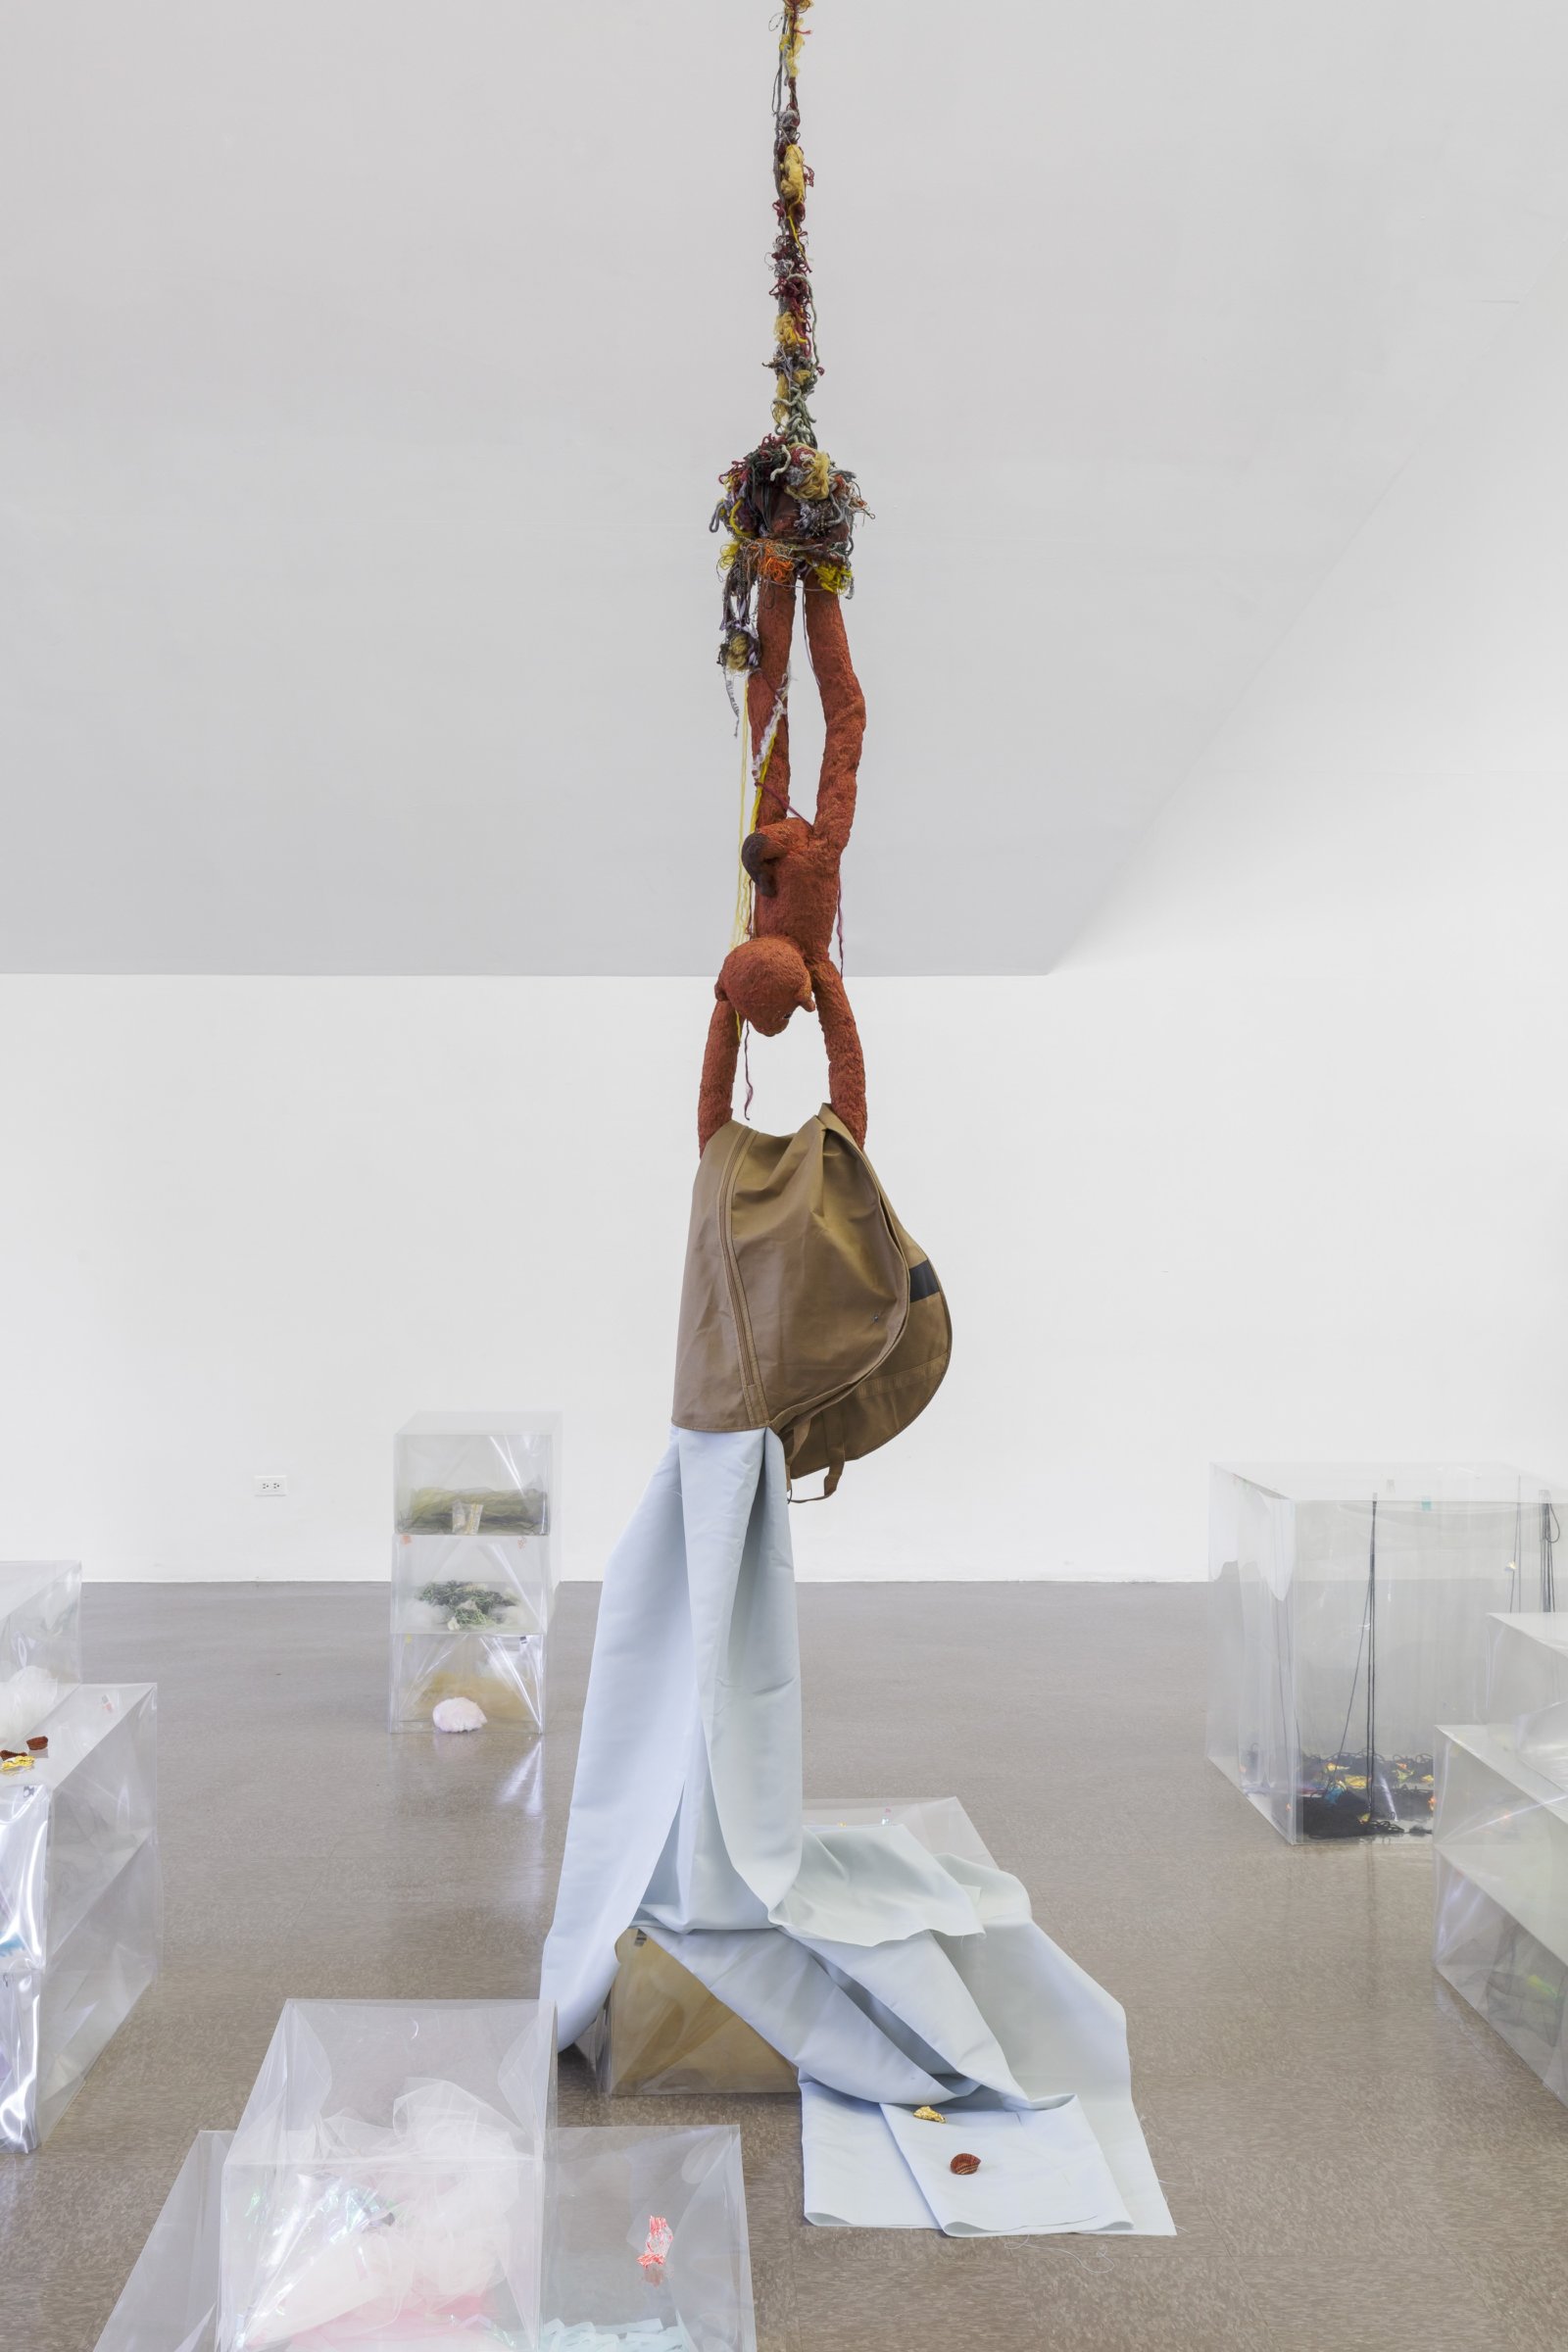 Liz Magor, Delivery (sienna), 2018, silicone rubber, textiles, twine, polyester film, yellow tulle, 144 x 20 x 14 in. (366 x 51 x 34 cm). Installation view, BLOWOUT, The Renaissance Society, Chicago, USA, 2019